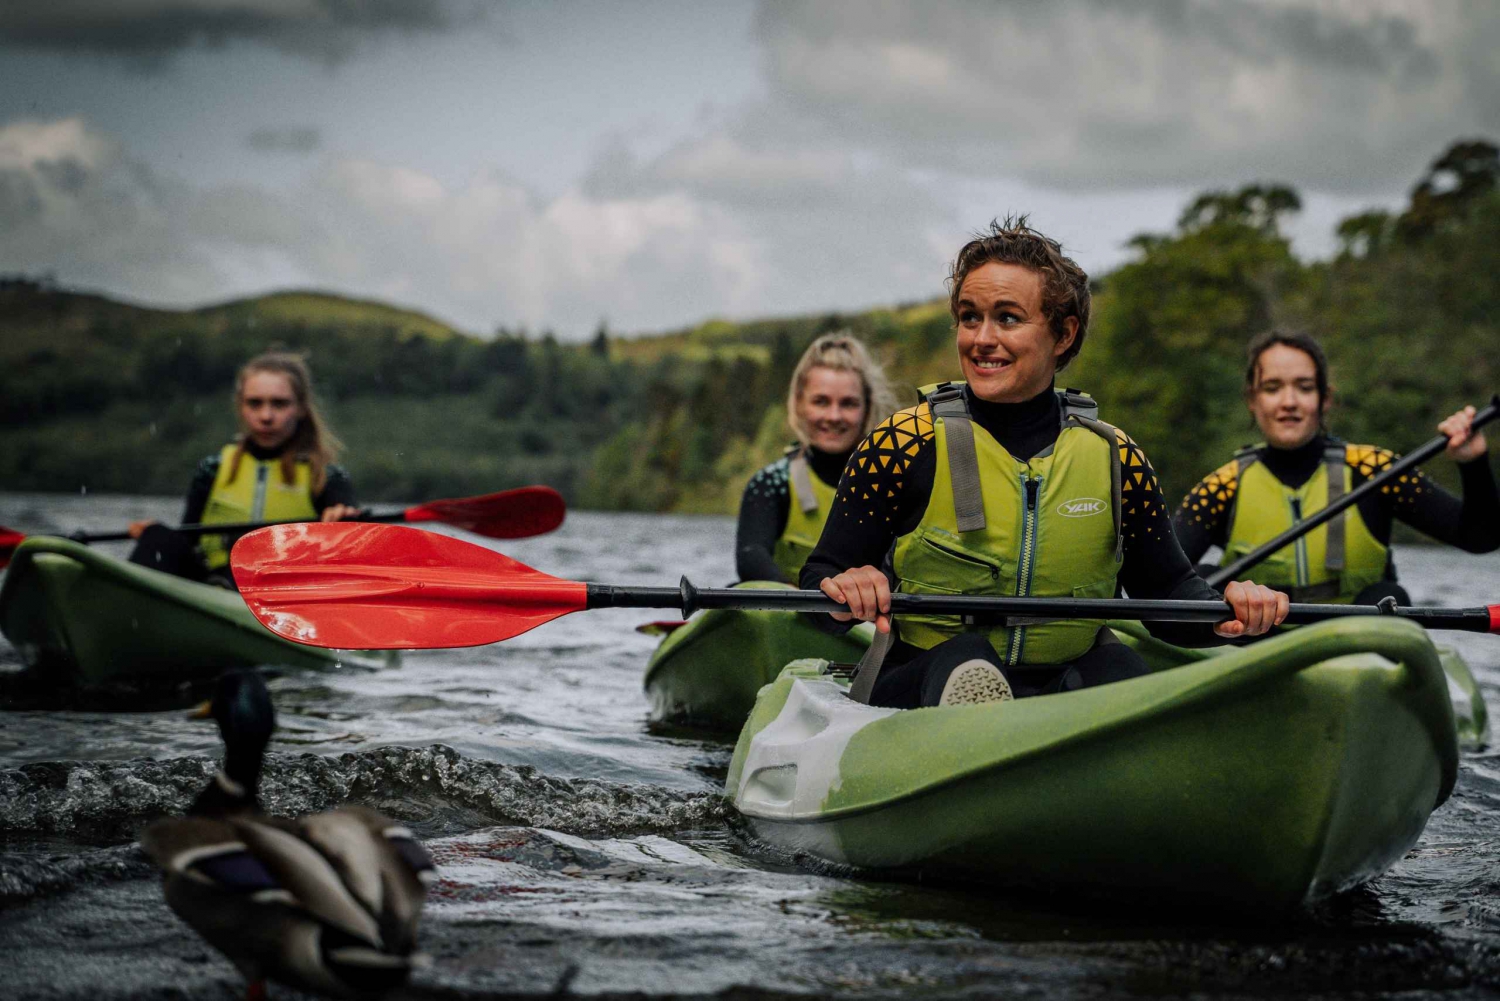 From Dublin: Sit on Top Kayak Experience